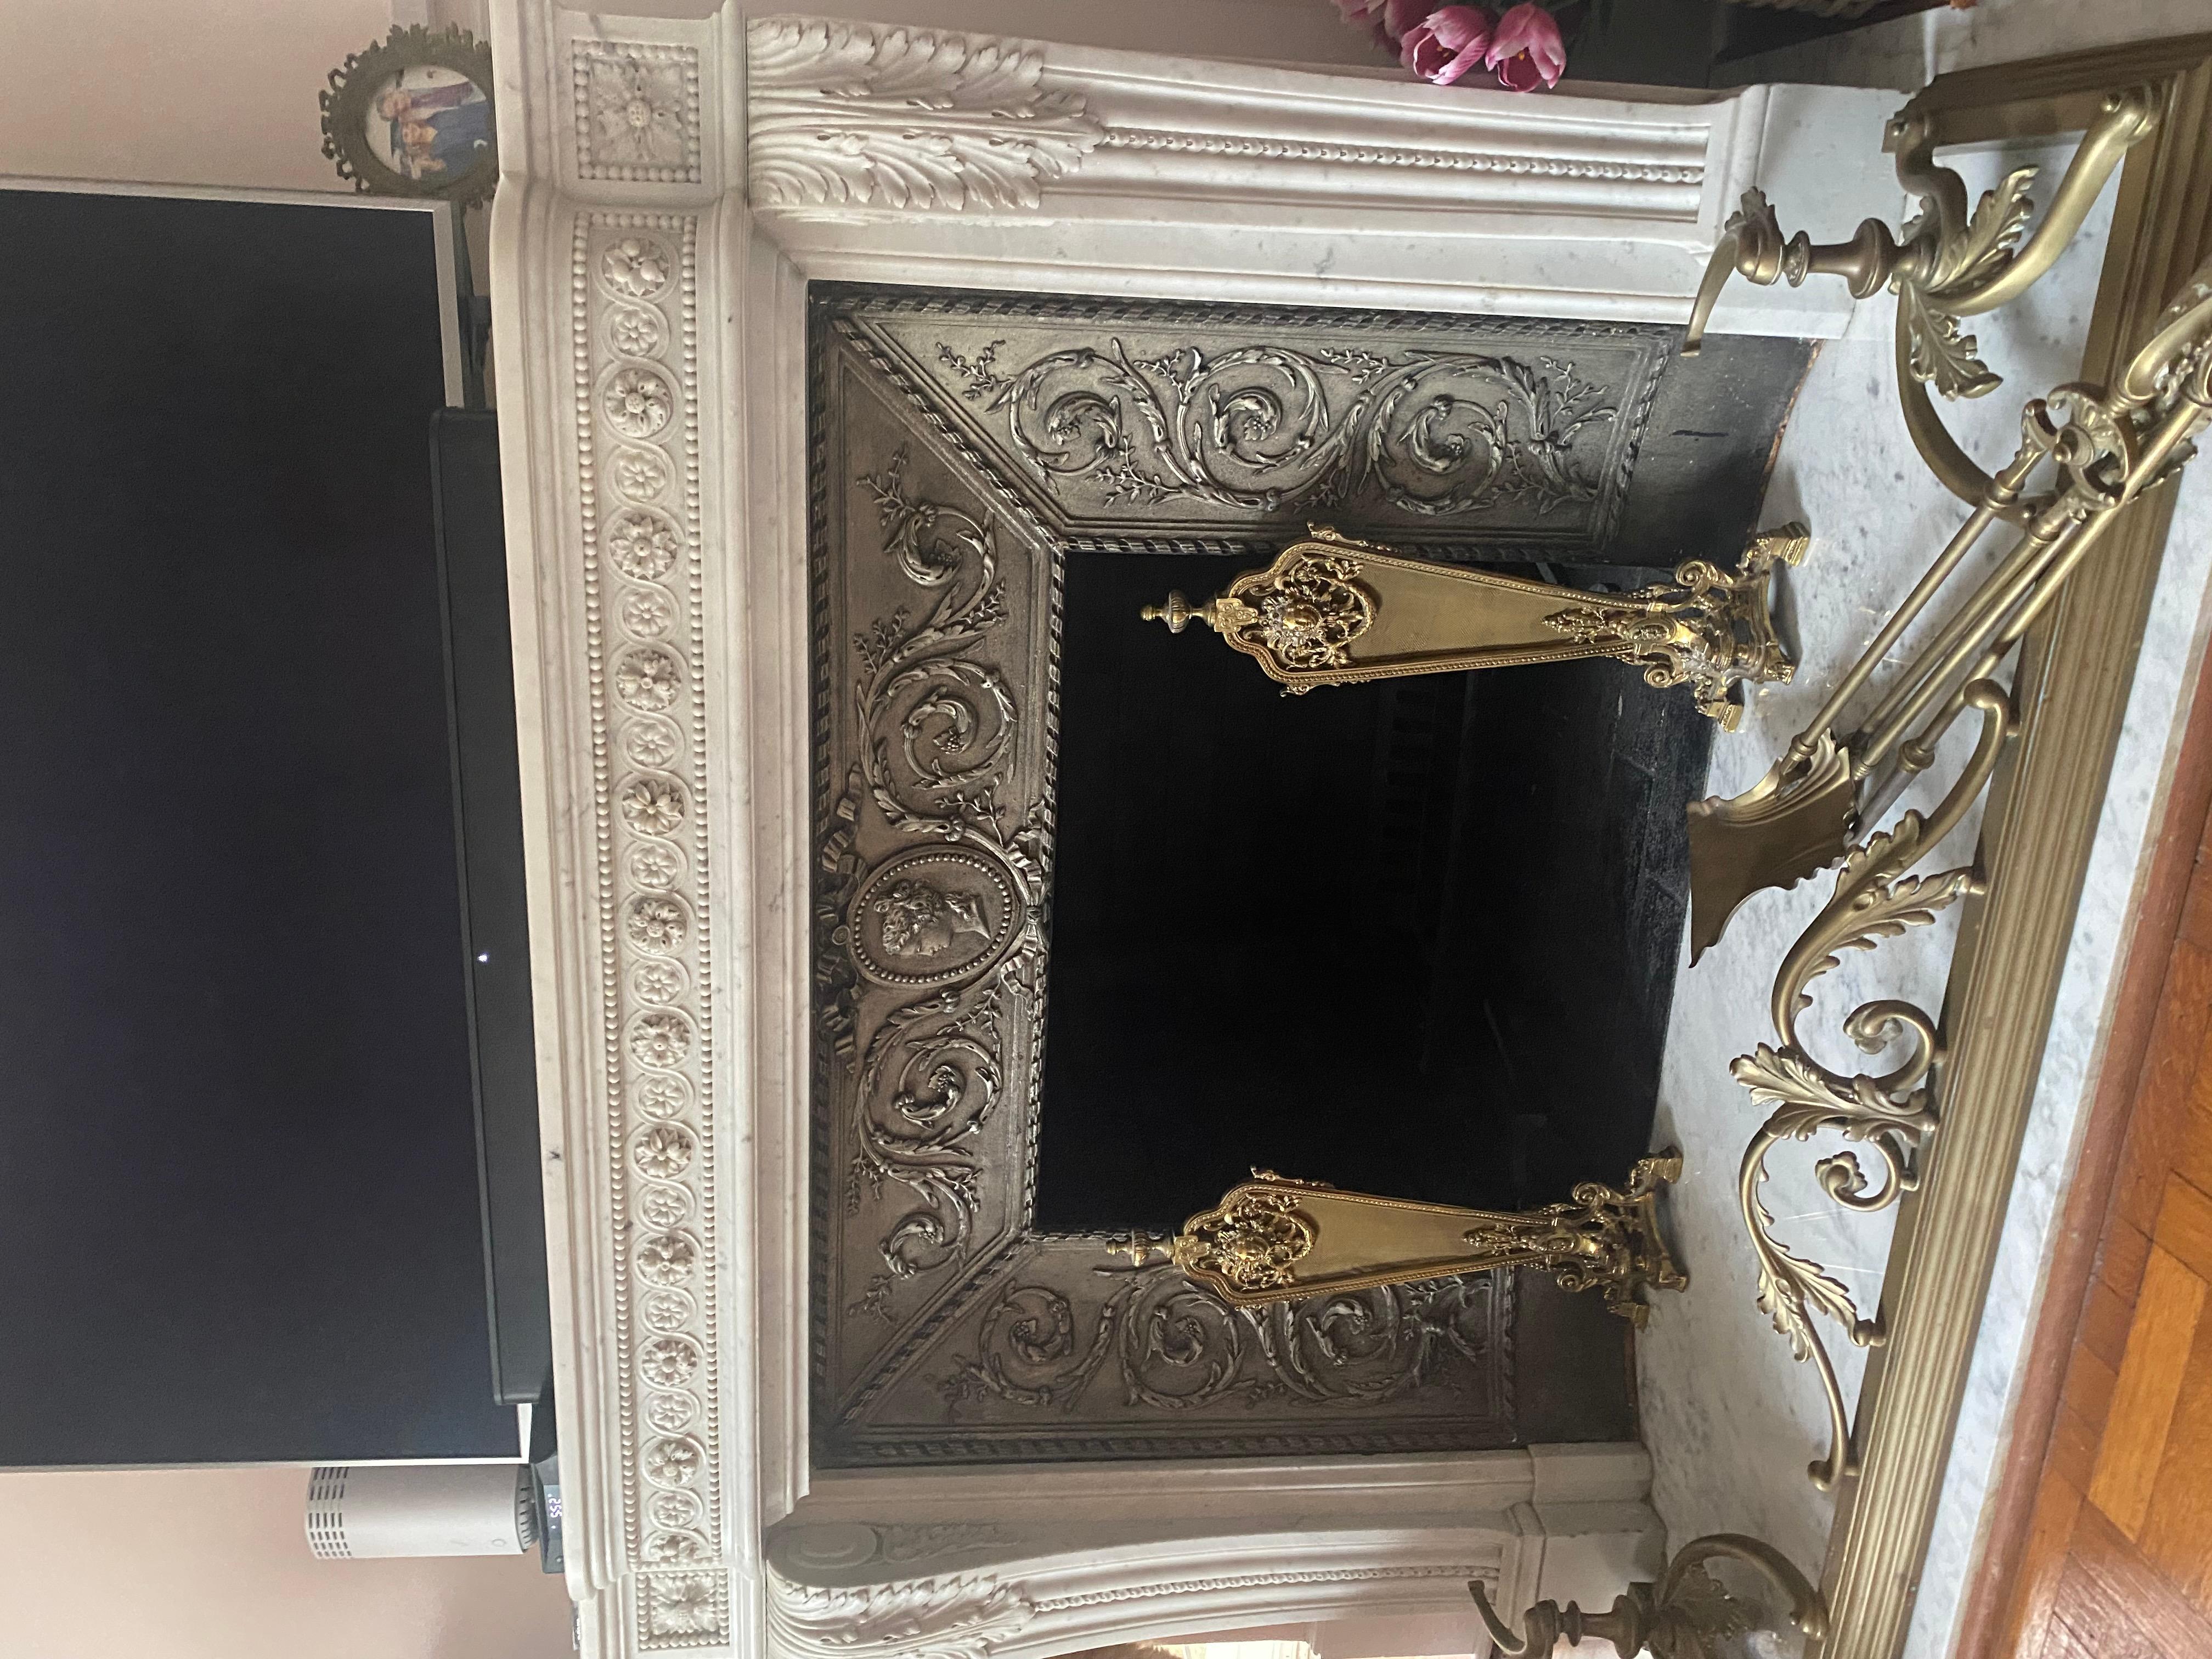 Superbly carved Louis XVI Fireplace in Carrara Marble with Cast Iron panels
Overall dimensions: 63